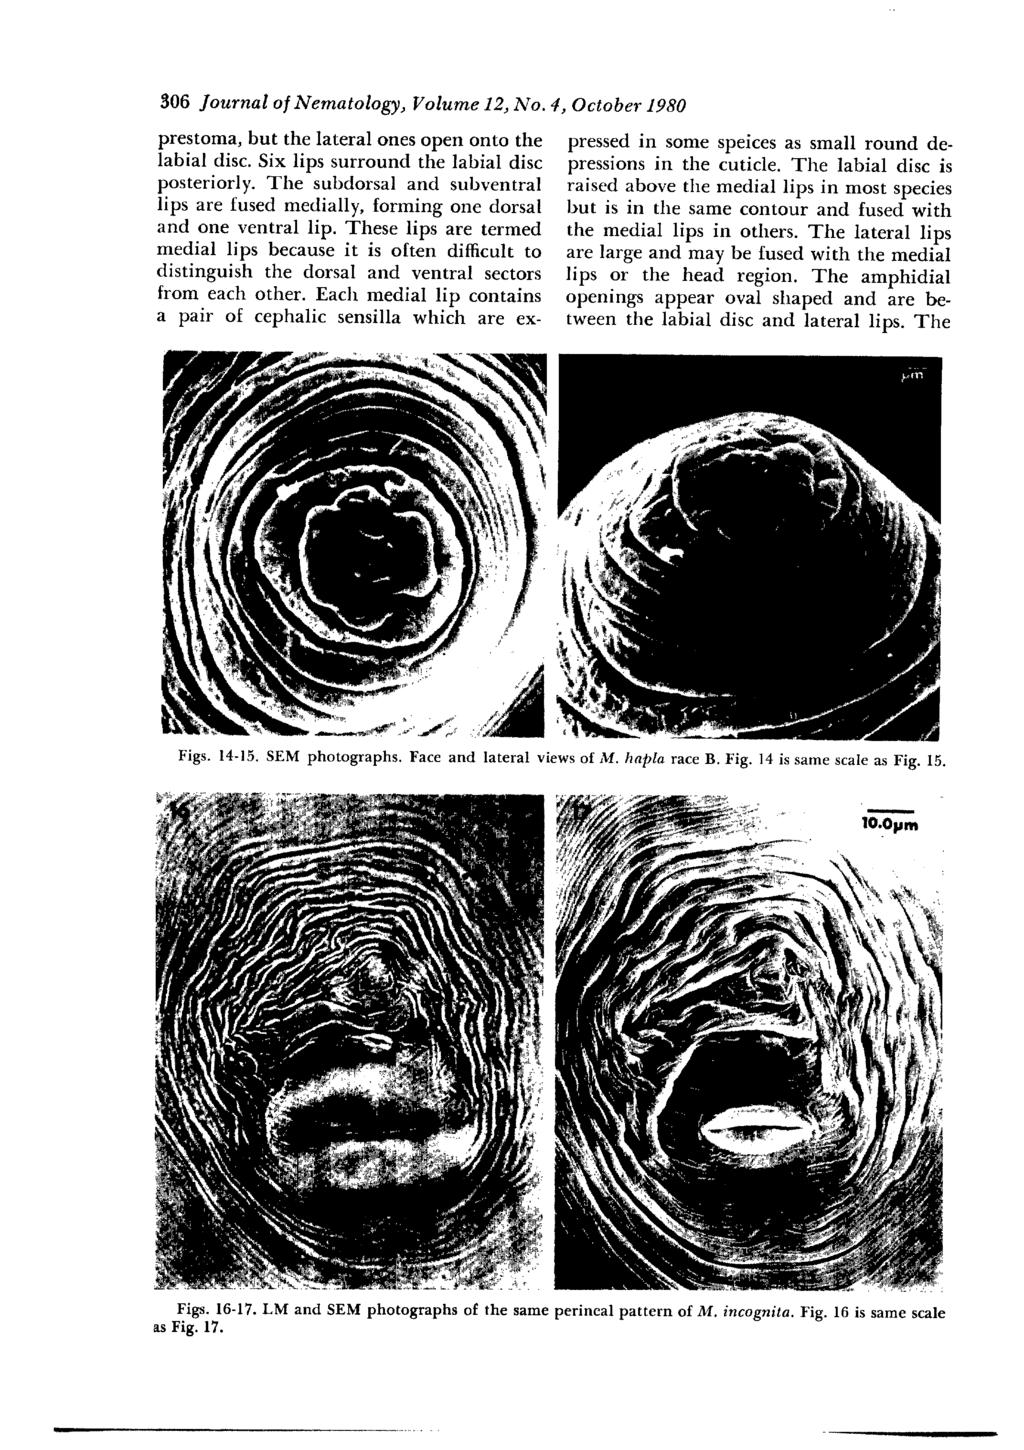 306 Journal o] Nematology, Volume 12, No. 4, October 1980 prestoma, but the lateral ones open onto the labial disc. Six lips surround the labial disc posteriorly.